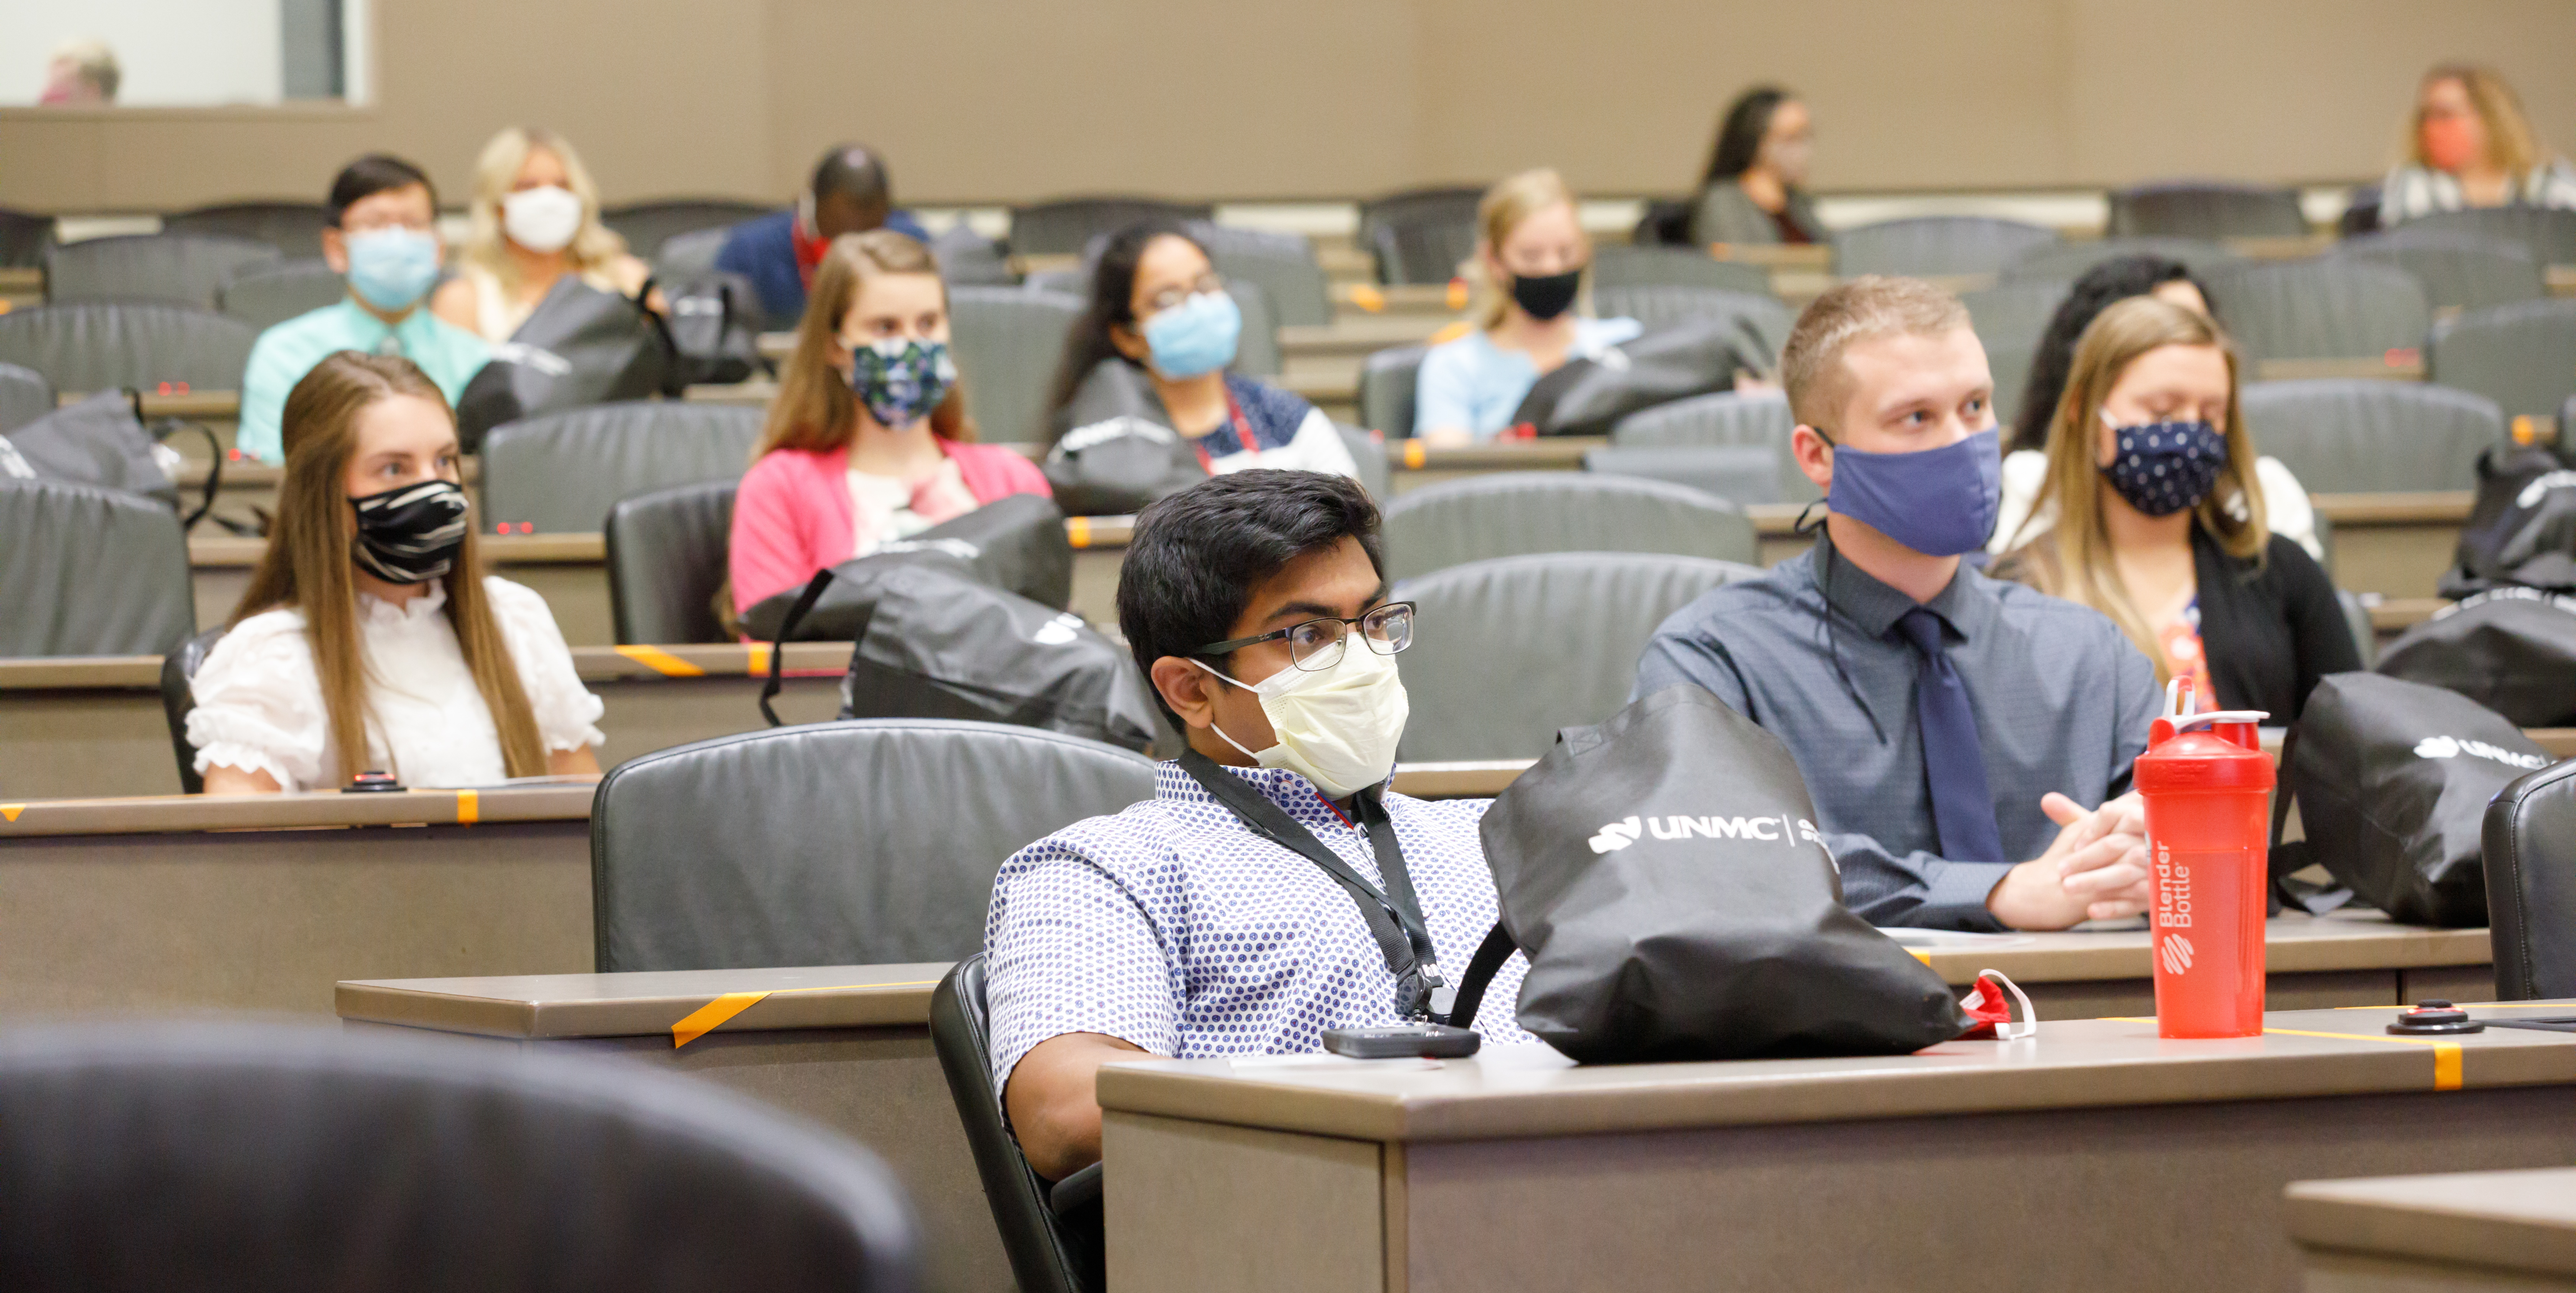 Students learning in classroom auditorium